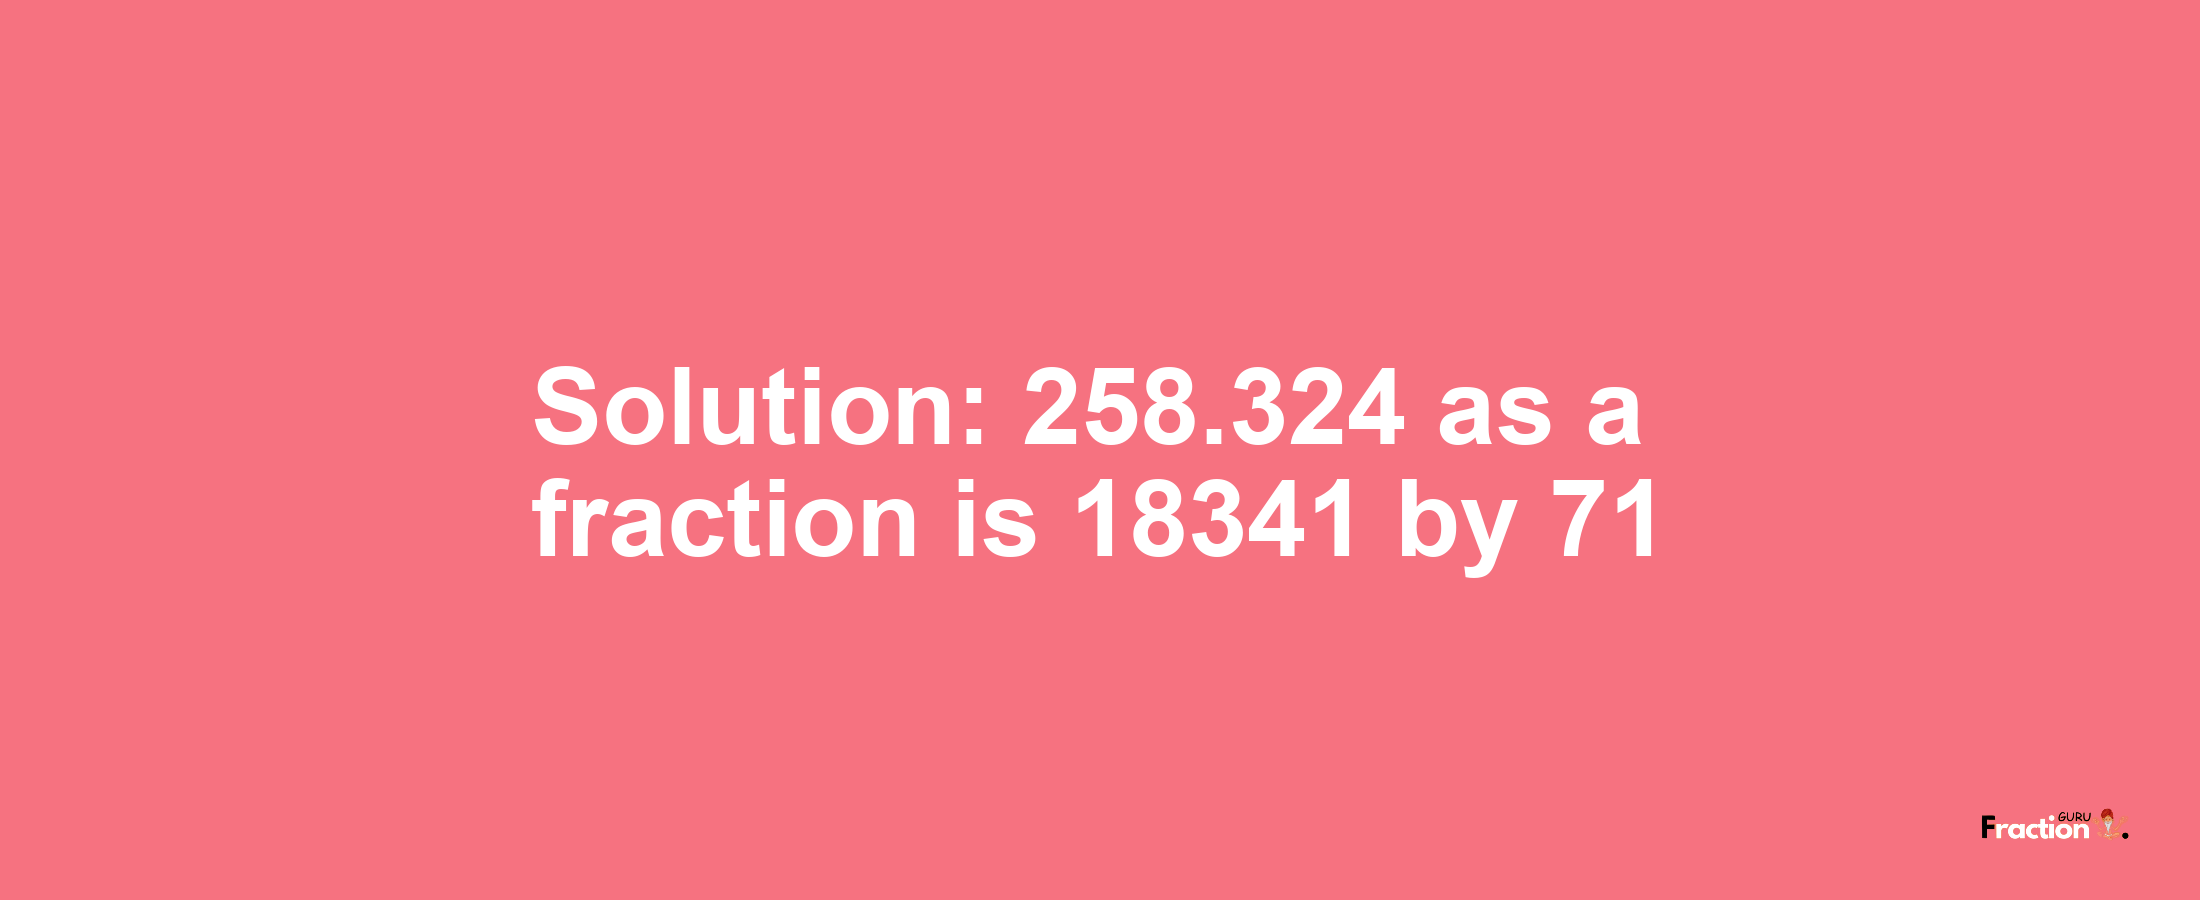 Solution:258.324 as a fraction is 18341/71